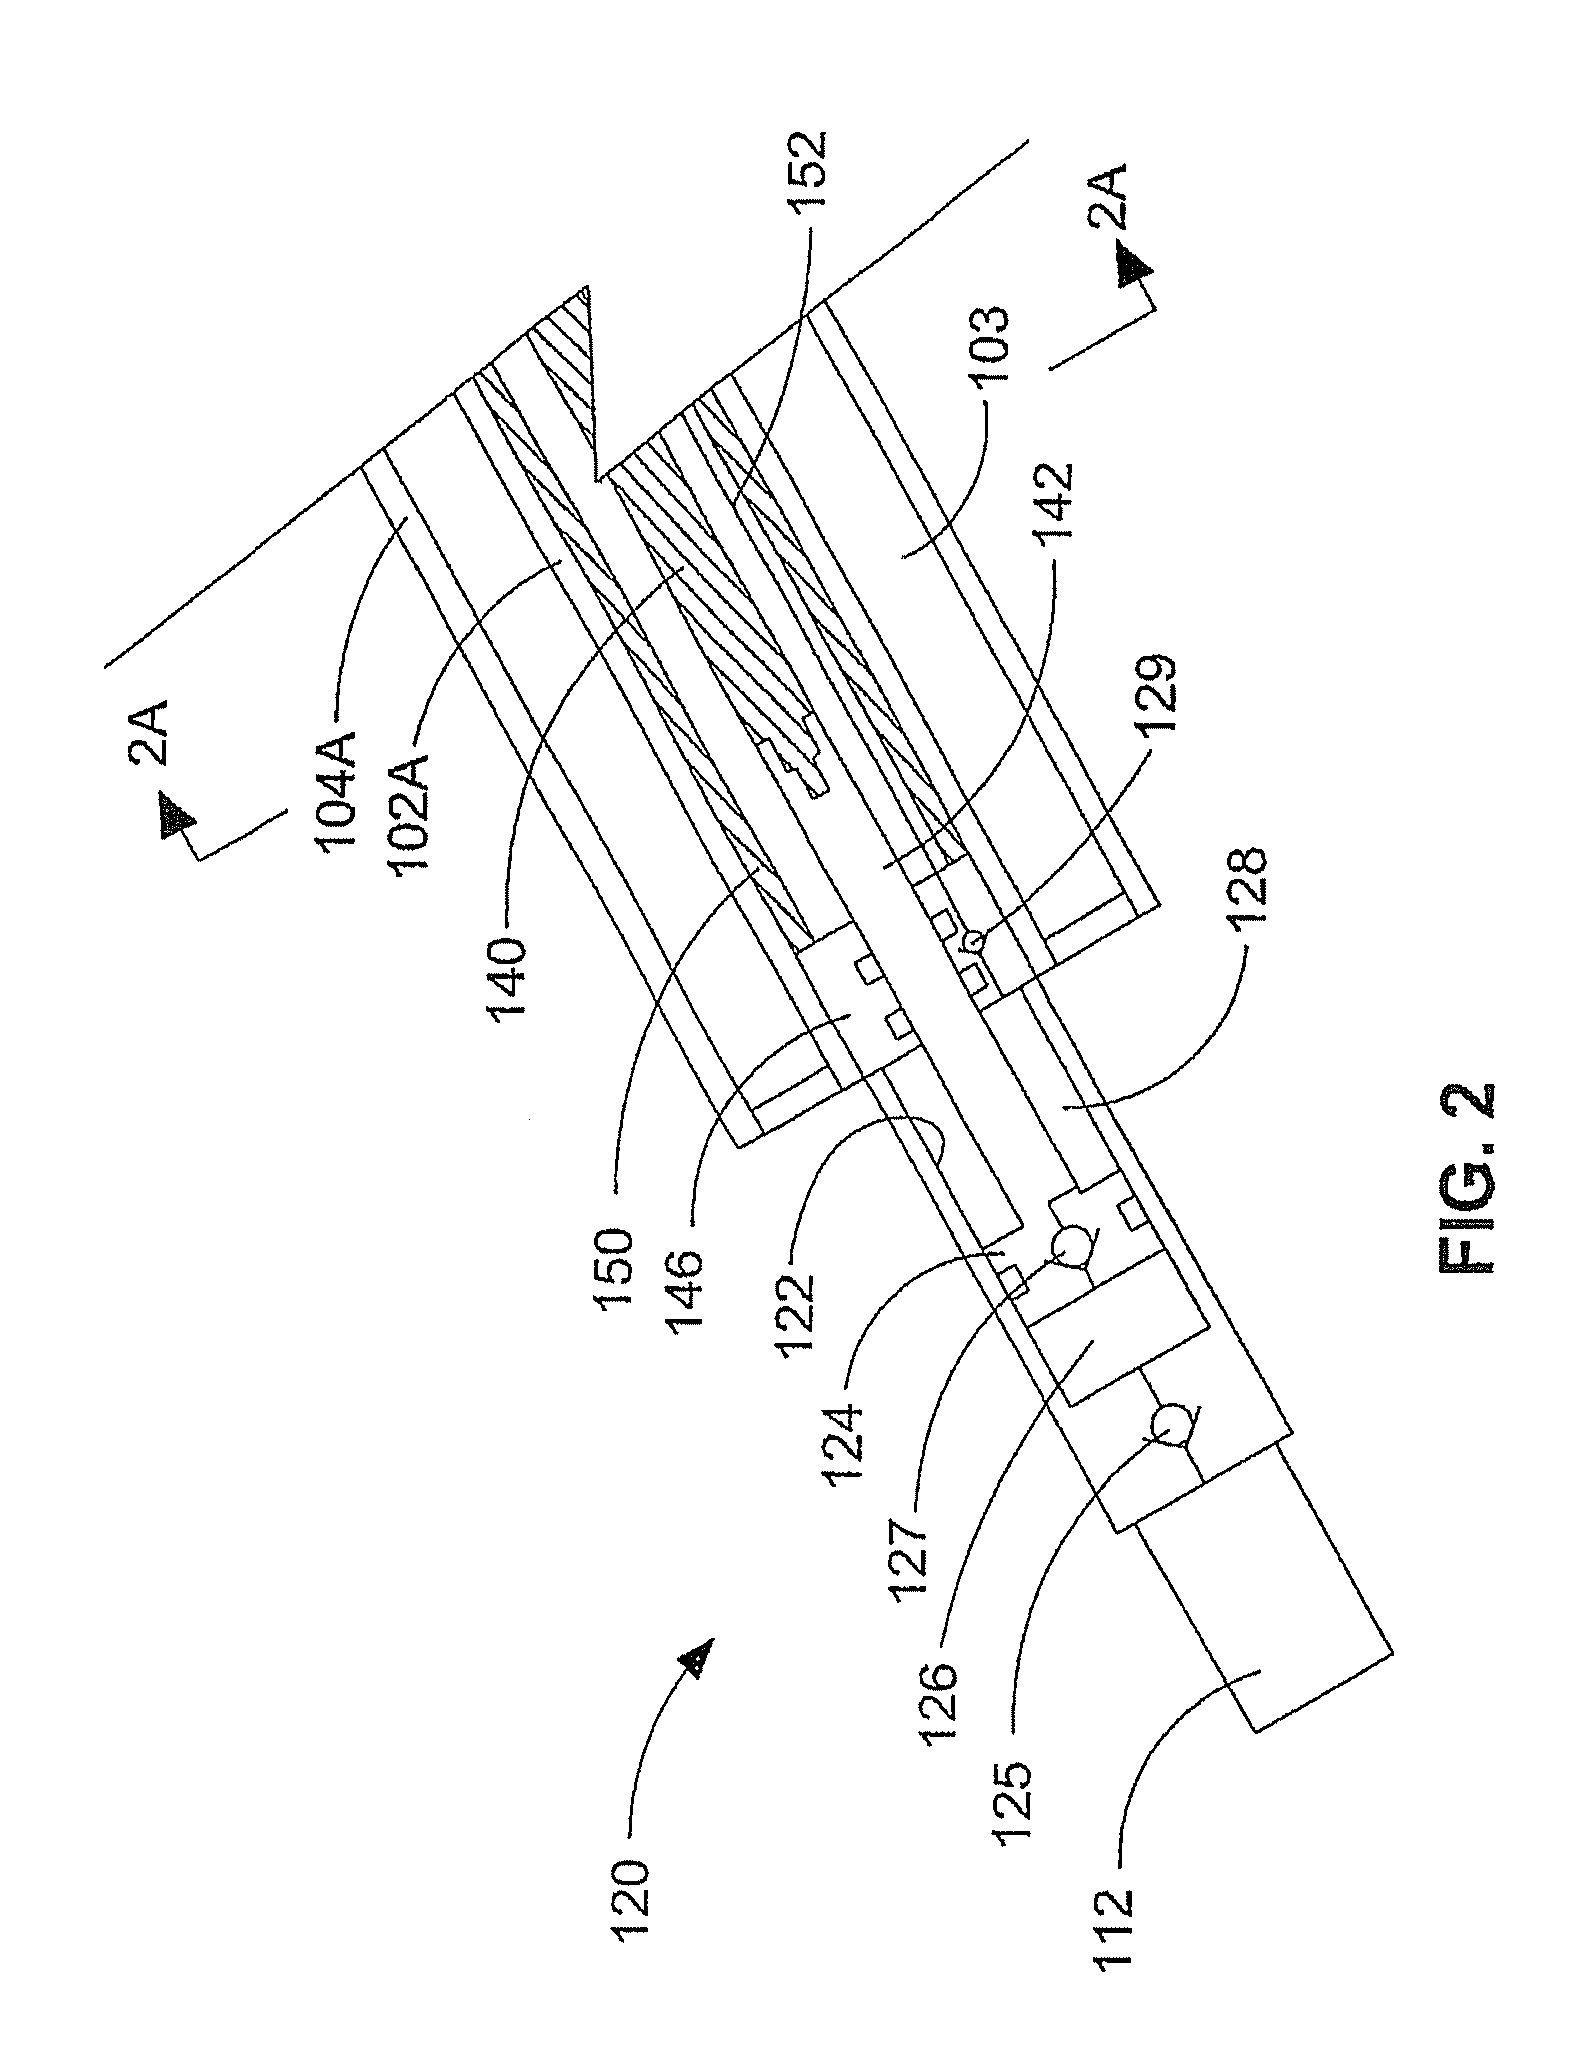 Apparatus and method for holding a cryogenic fluid and removing cryogenic fluid therefrom with reduced heat leak